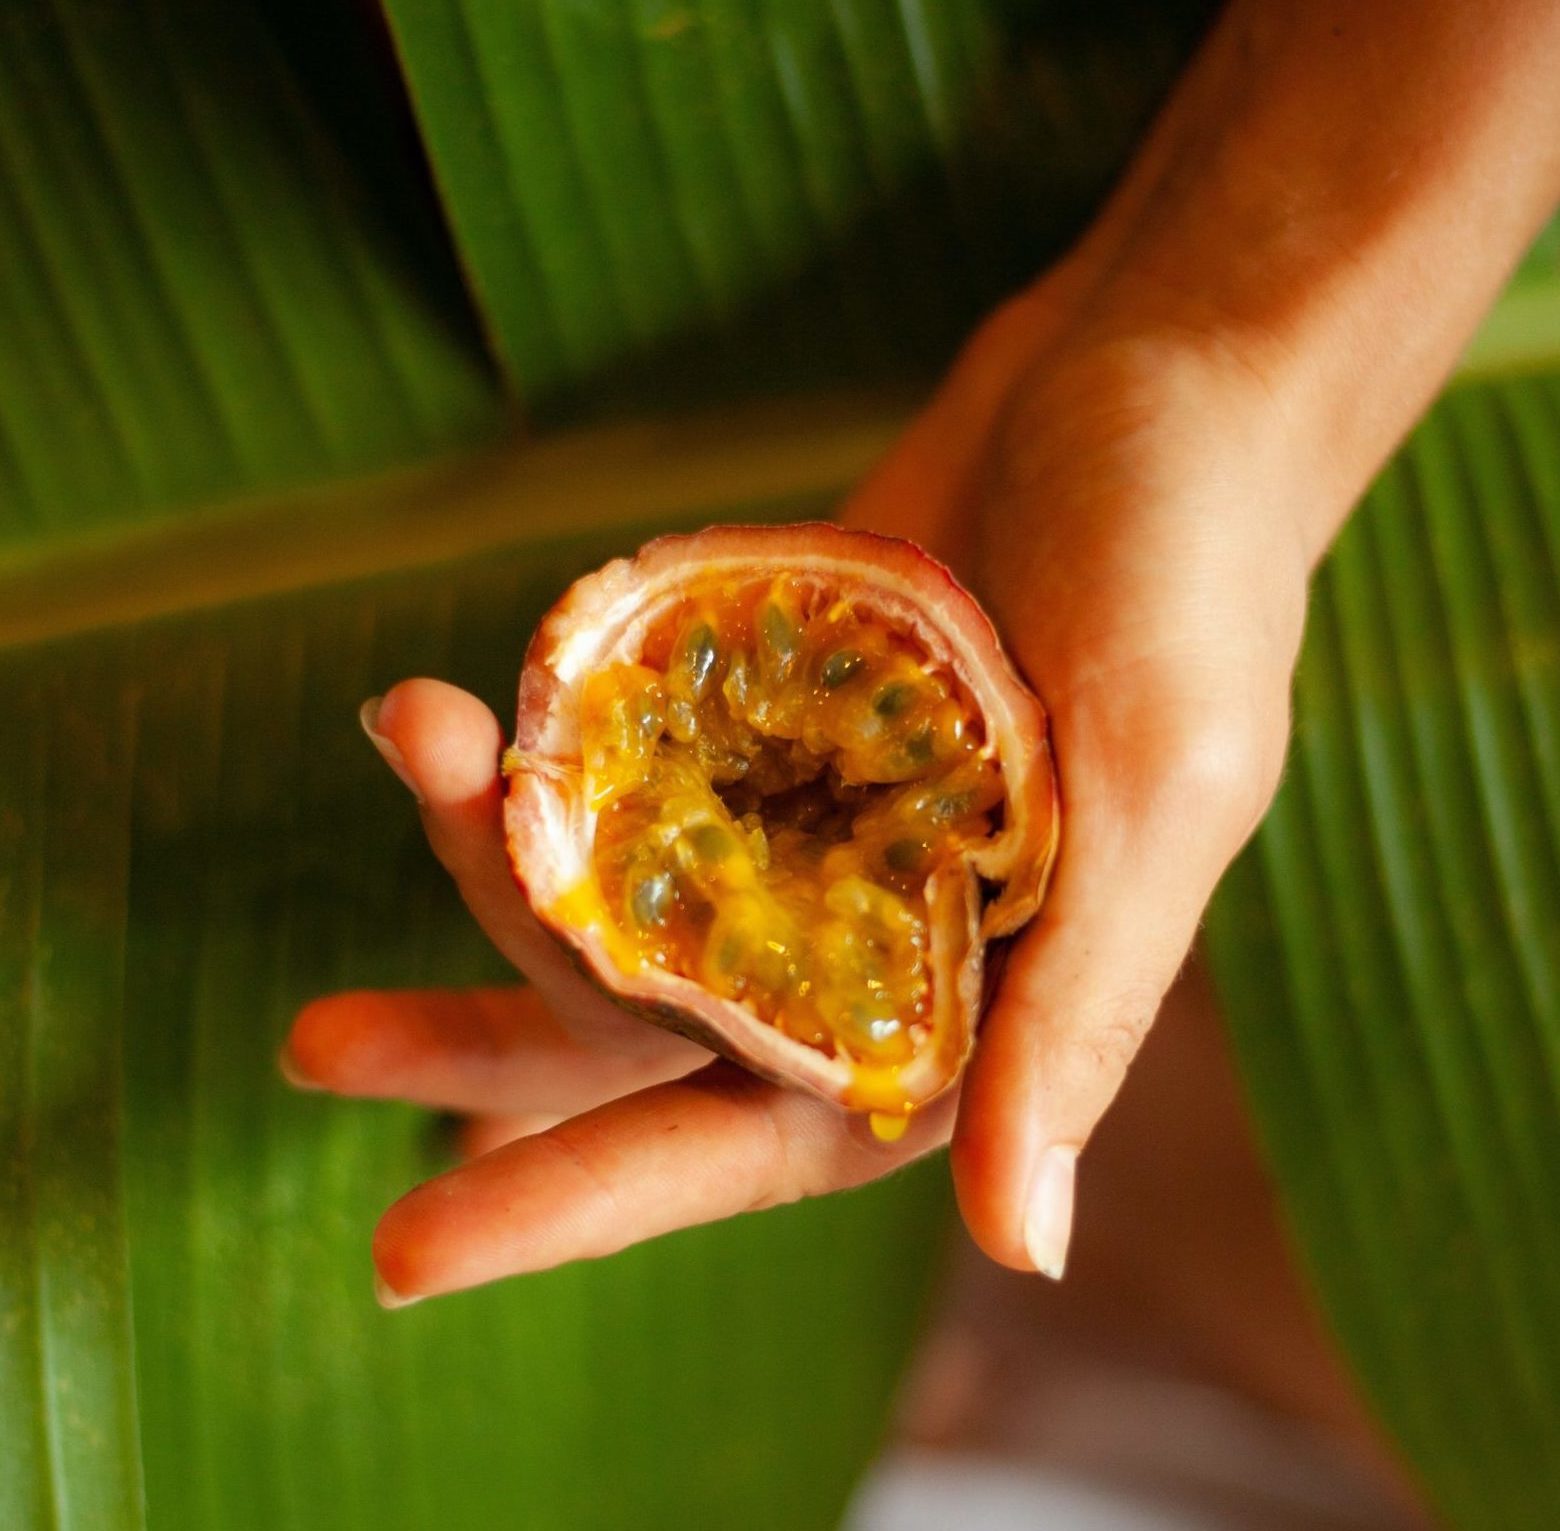 Clitoral shaped passion fruit half in woman's hand